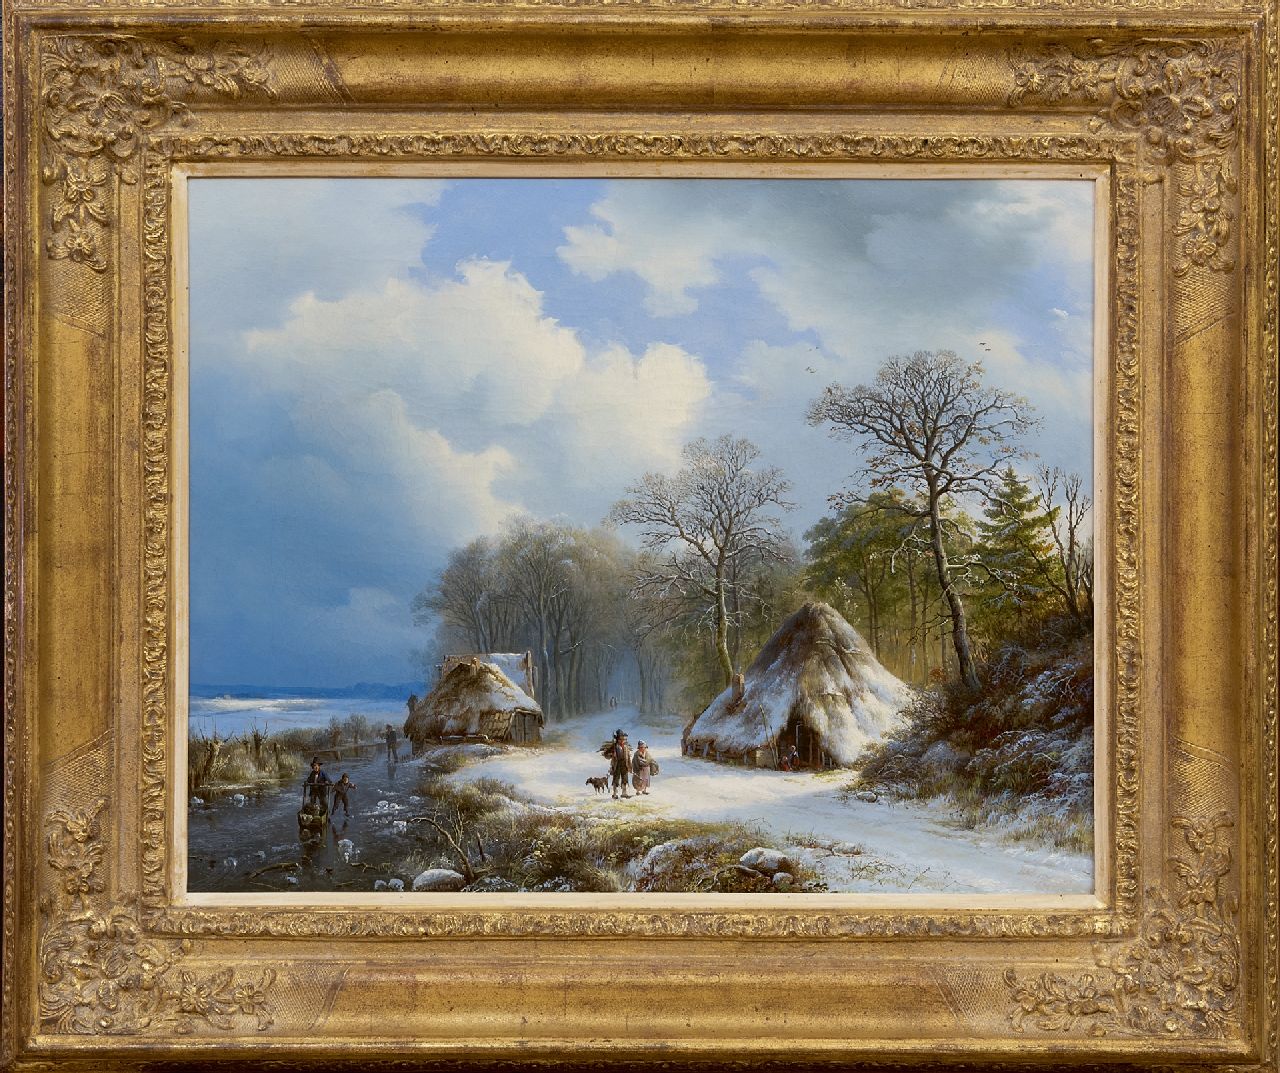 Bodeman W.  | Willem Bodeman, A winter landscape with skaters and wood gatherers, oil on canvas 43.0 x 54.0 cm, signed l.c. and l.r. (indistinctly) and dated '38 and 1838